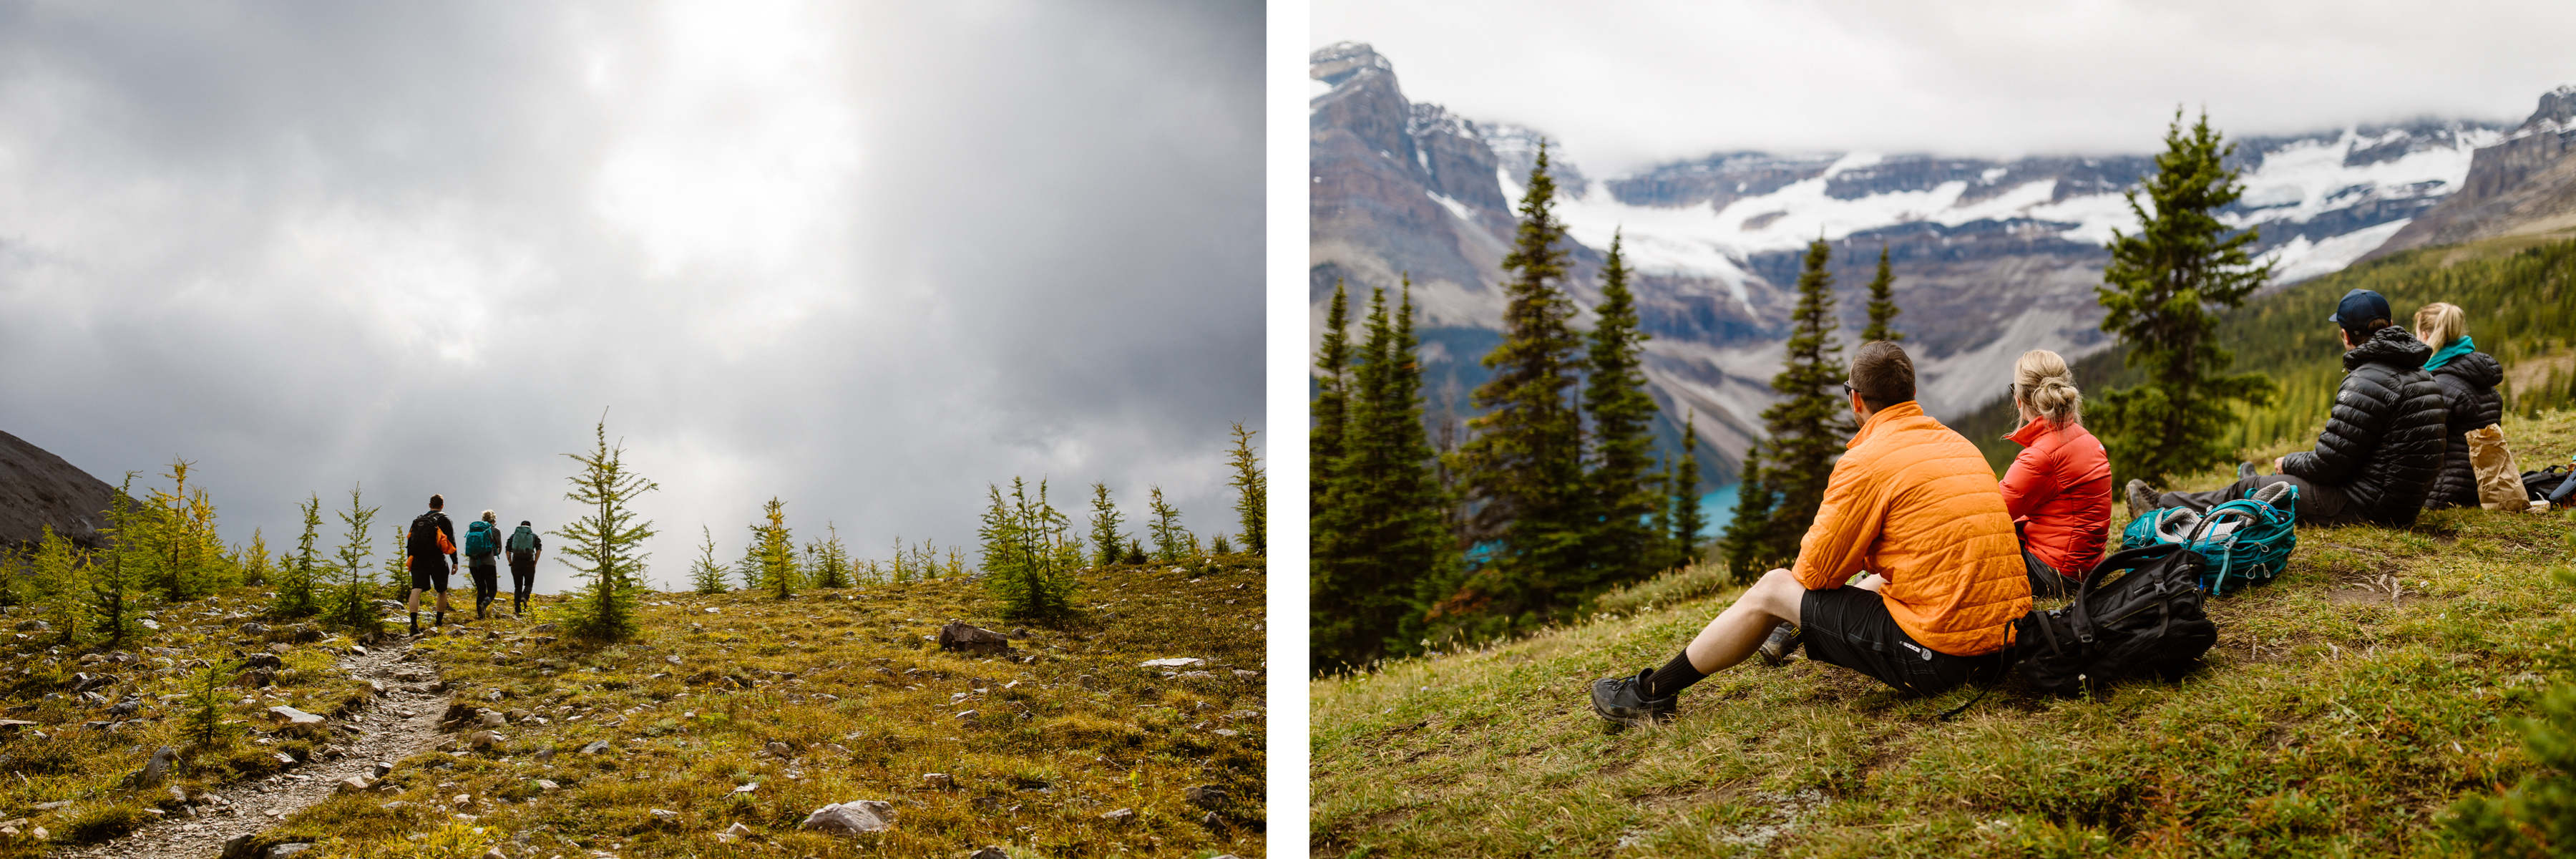 Mount Assiniboine Elopement Photographers at a Backcountry Lodge - Photo 62